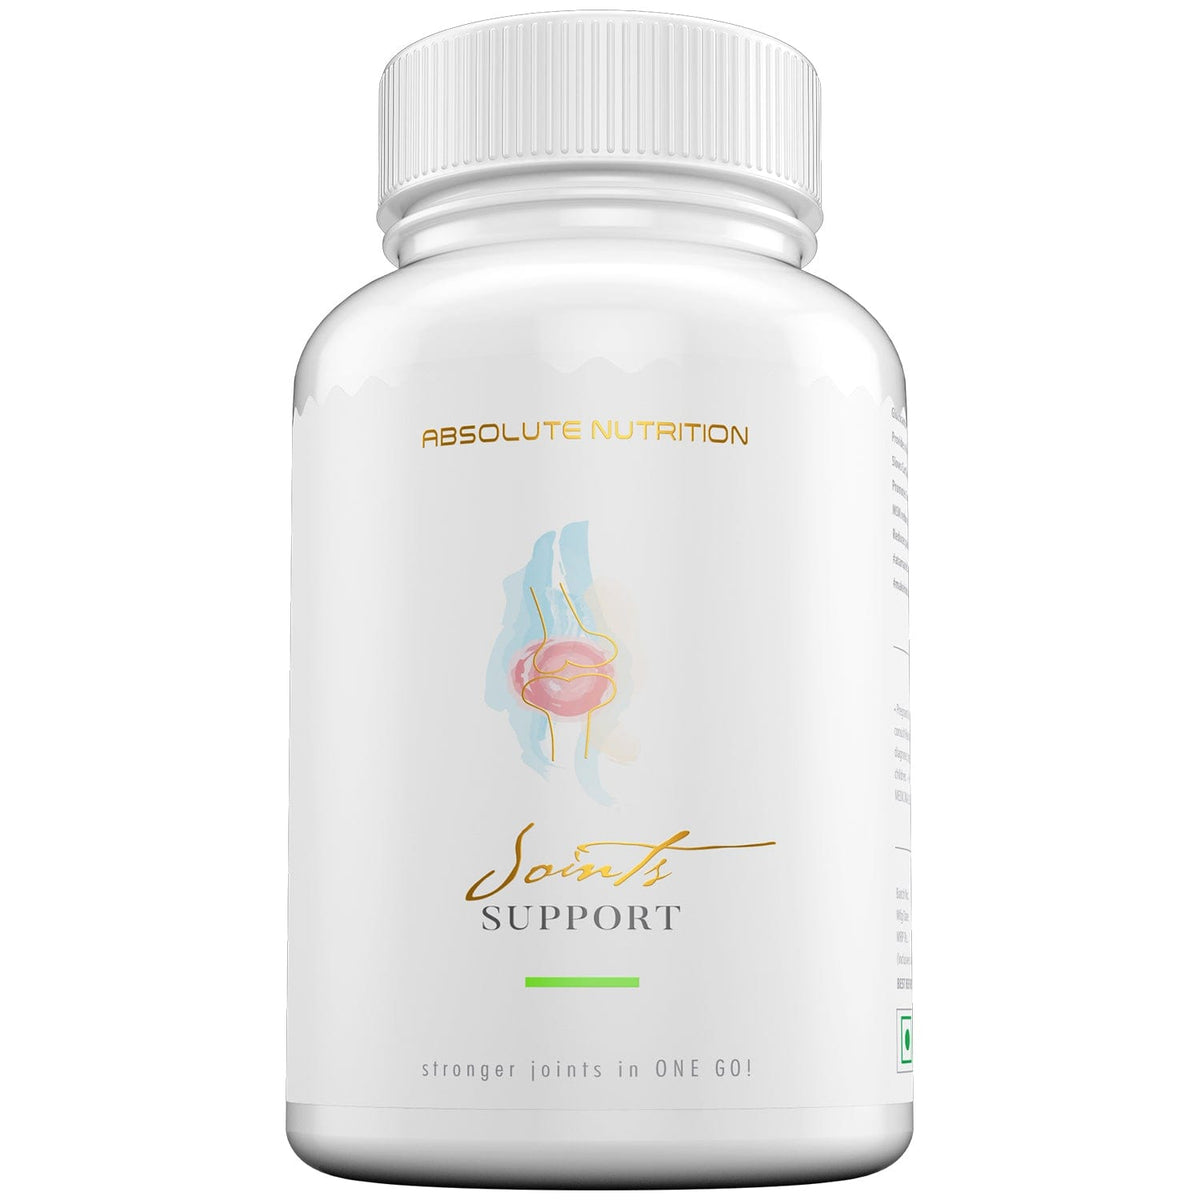 Joints Support 60 Veg. Capsule - Absolute Nutrition - knockout by Absolute Nutrition